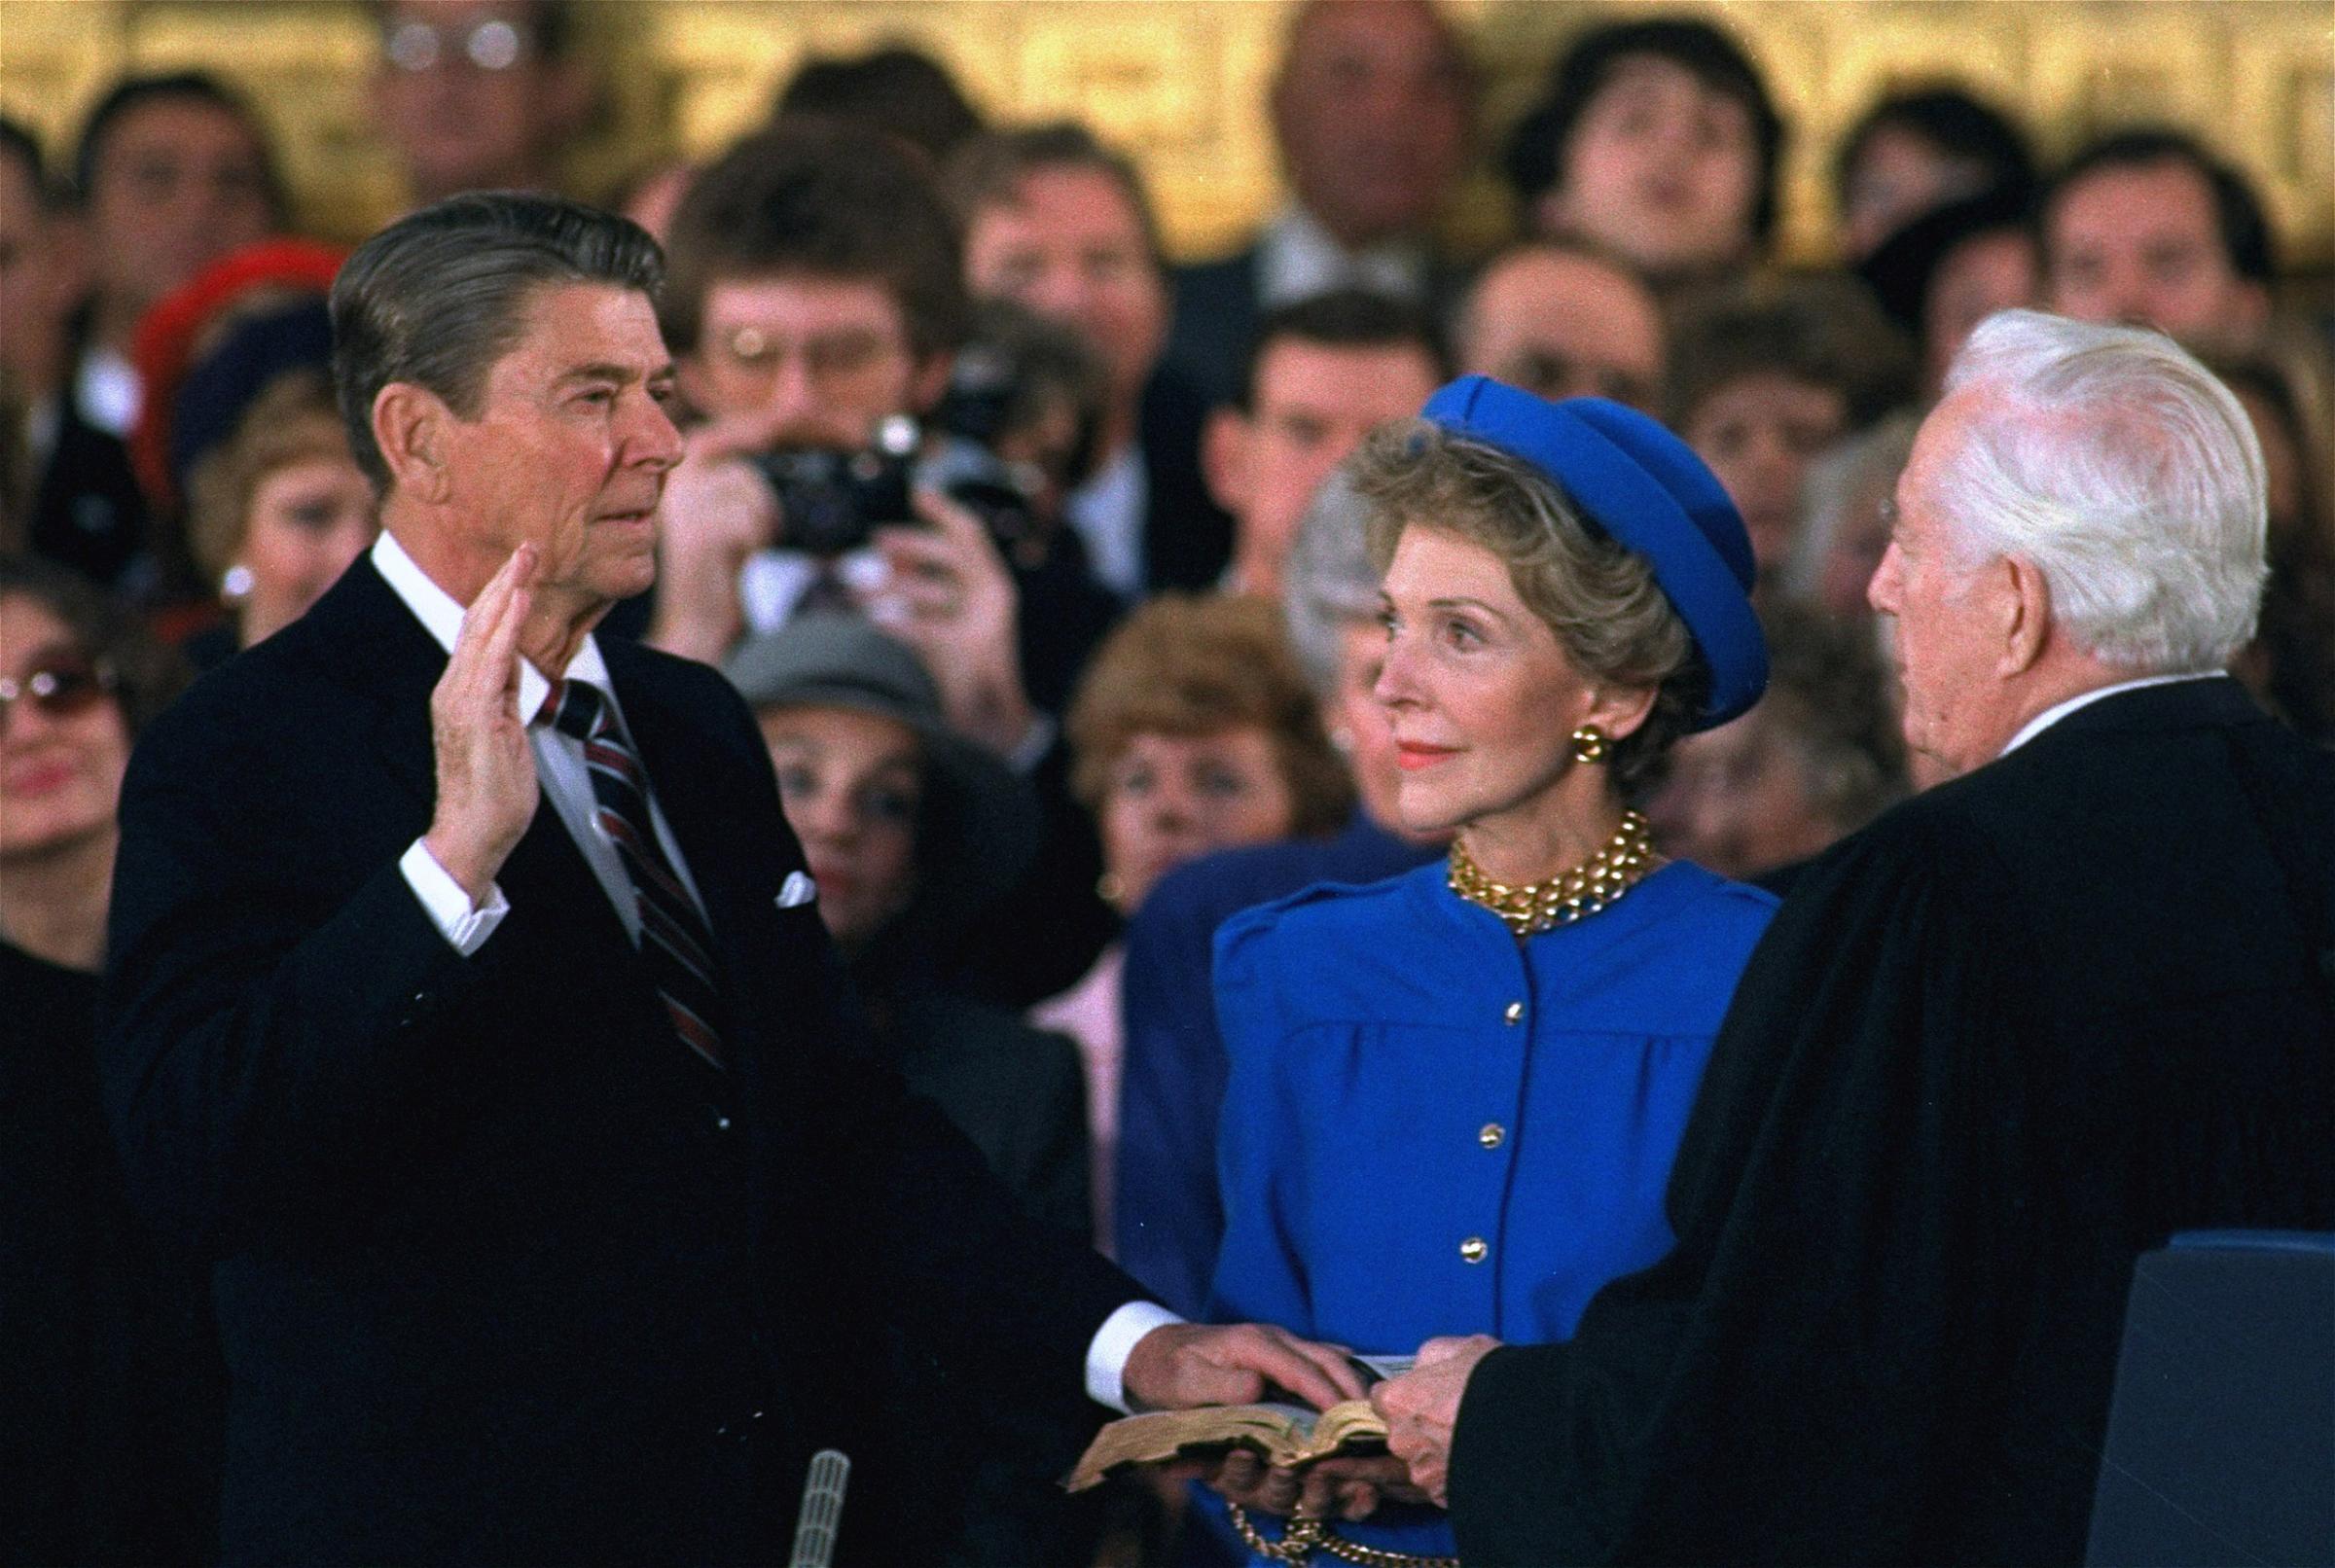 First Lady Nancy Reagan watches as President Ronald Reagan is sworn in during ceremonies in the Rotunda beneath the Capitol Dome in Washington, Jan. 21, 1985.